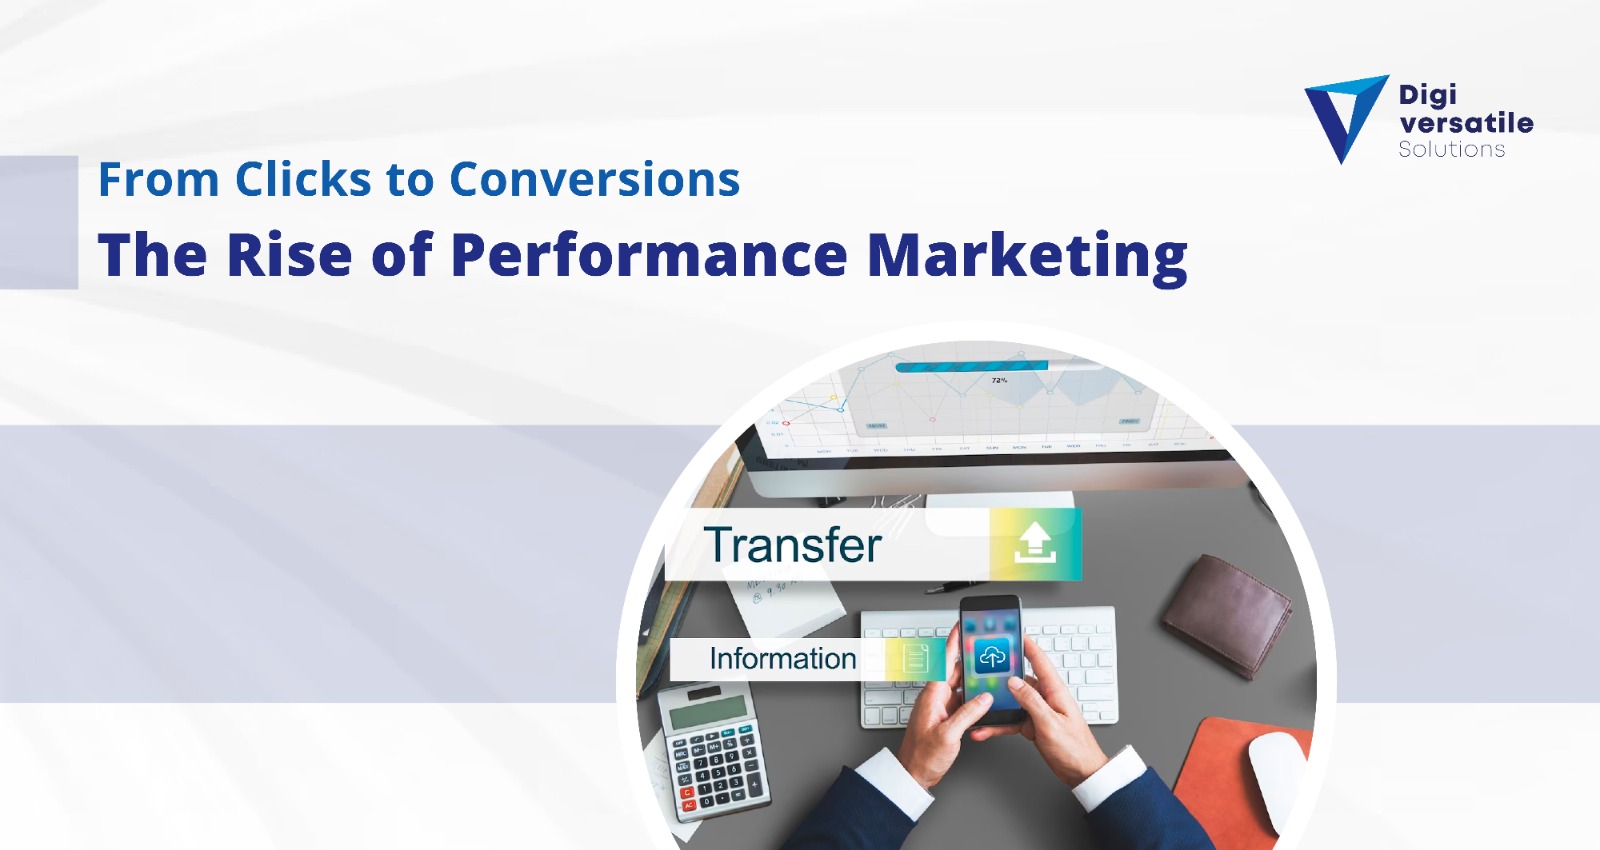 From Clicks to Conversions: The Rise of Performance Marketing